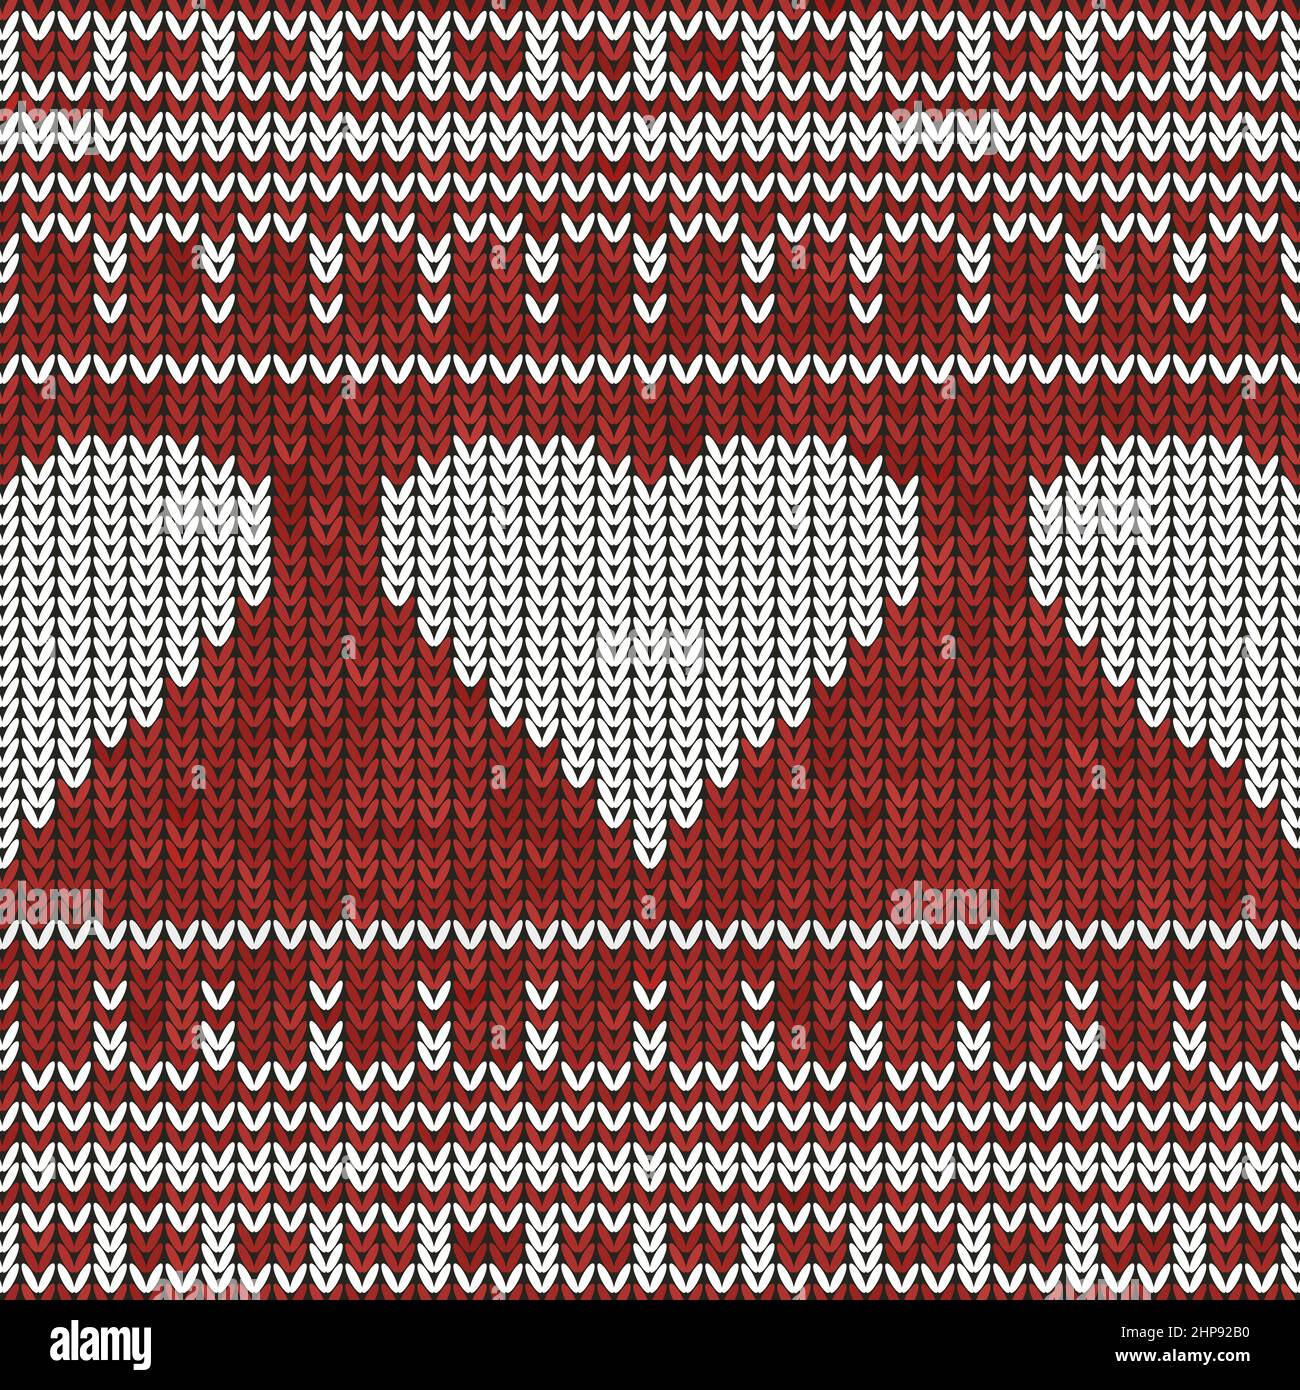 Christmas Knit Print. Scandinavian Red Border Wool Pullover. Sweater Ugly. Holiday Heart Ornament. Festive Crochet Stock Vector